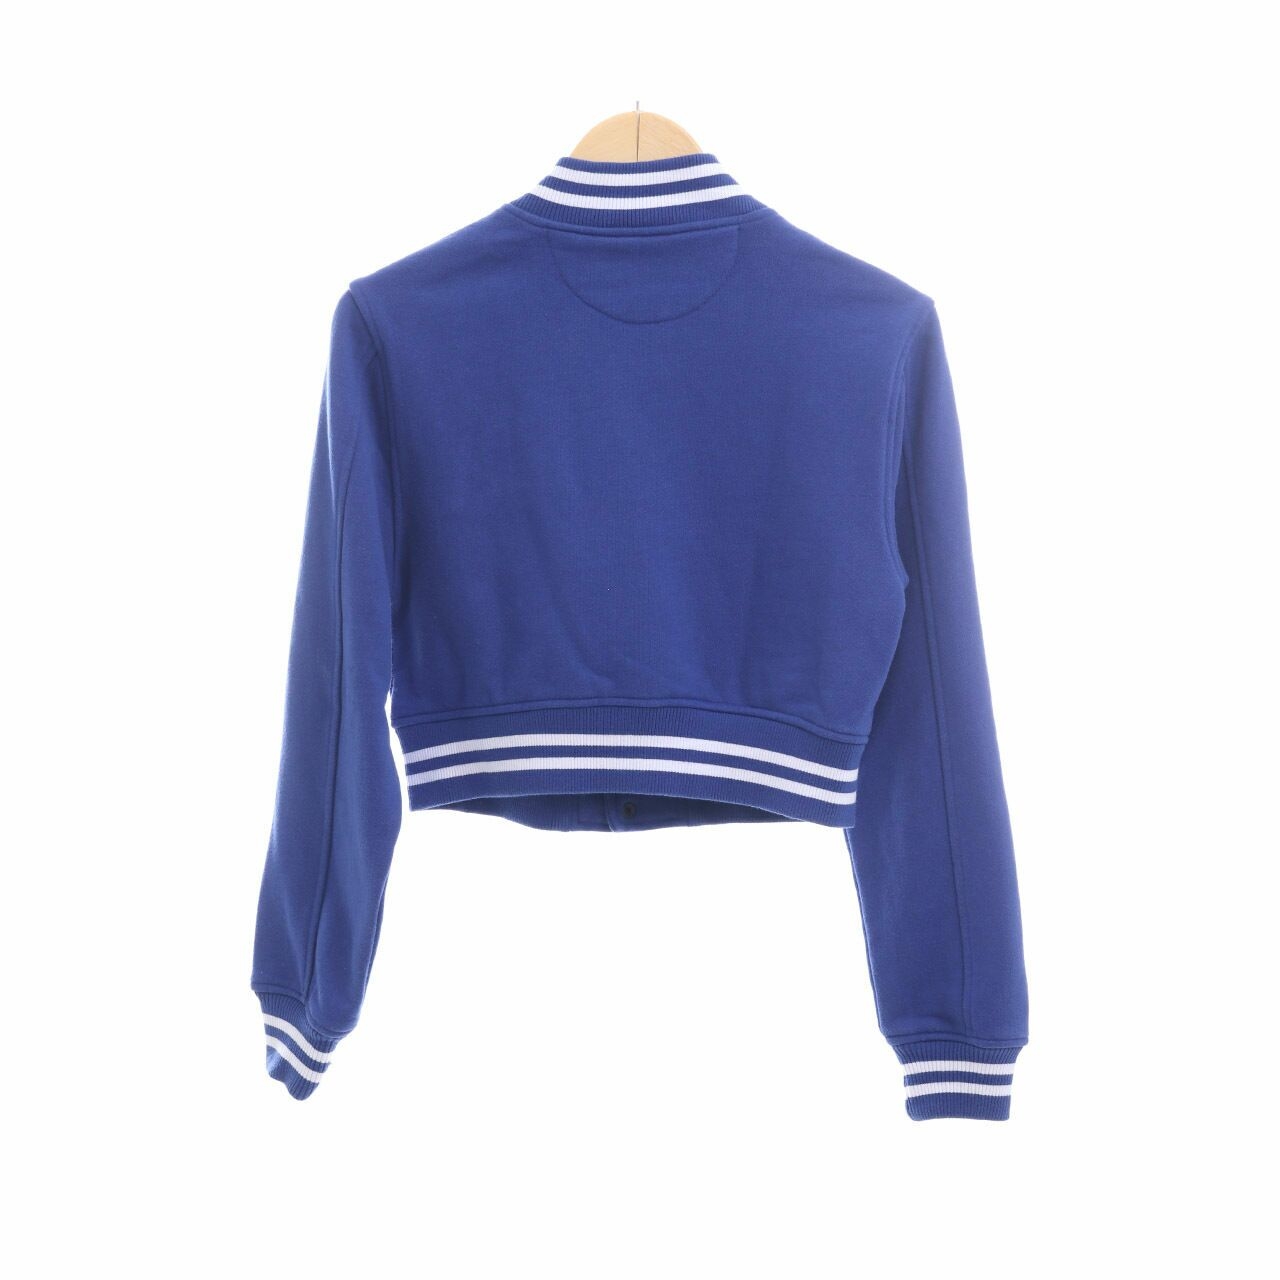 American Apparel Blue Cropped Jacket